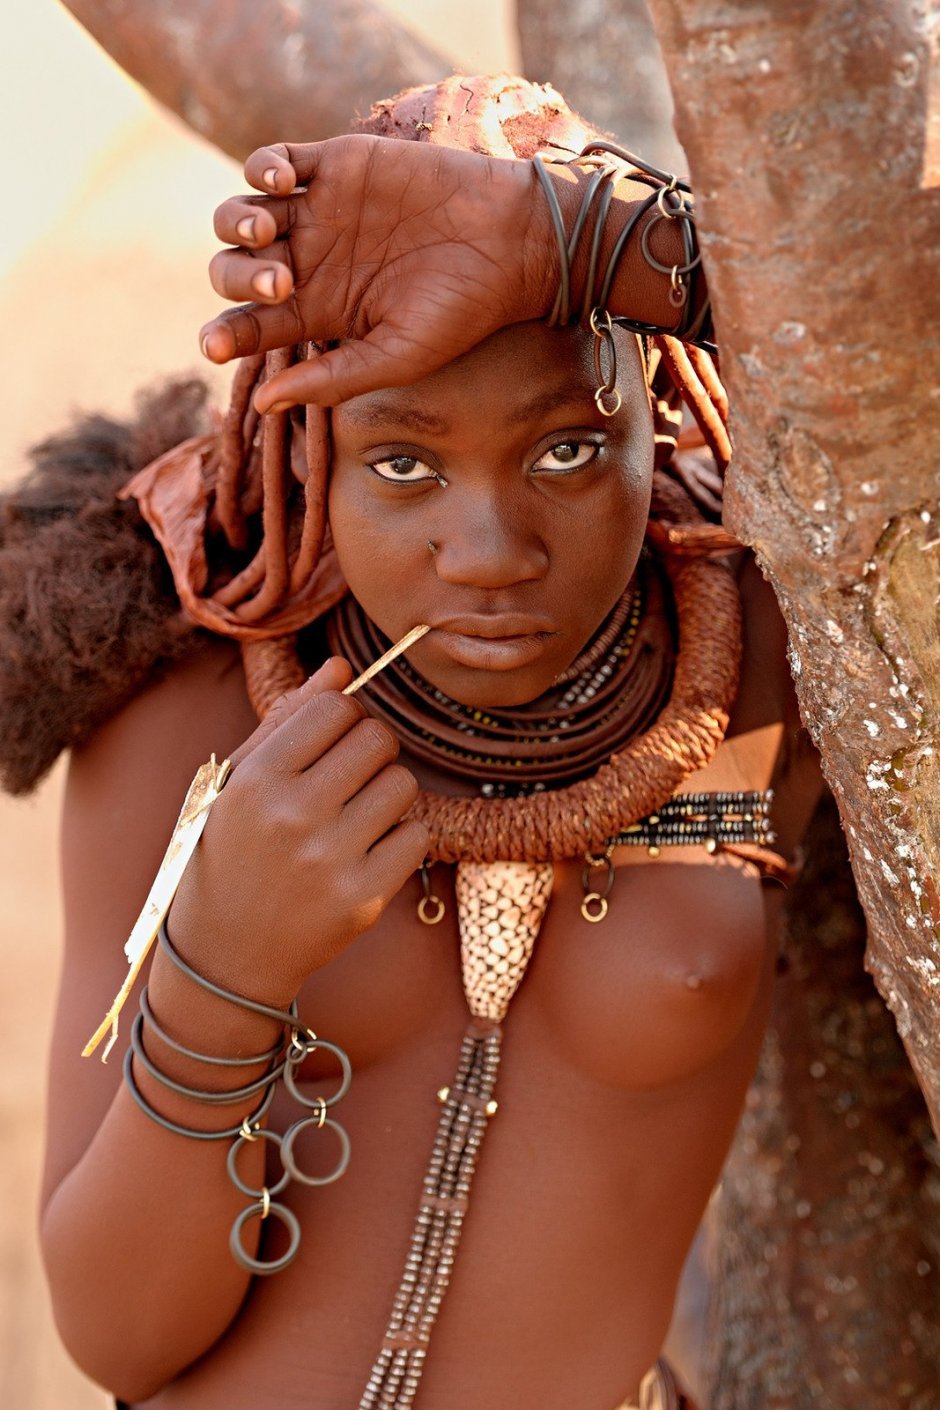 African Tribe Nudes - 39 photos